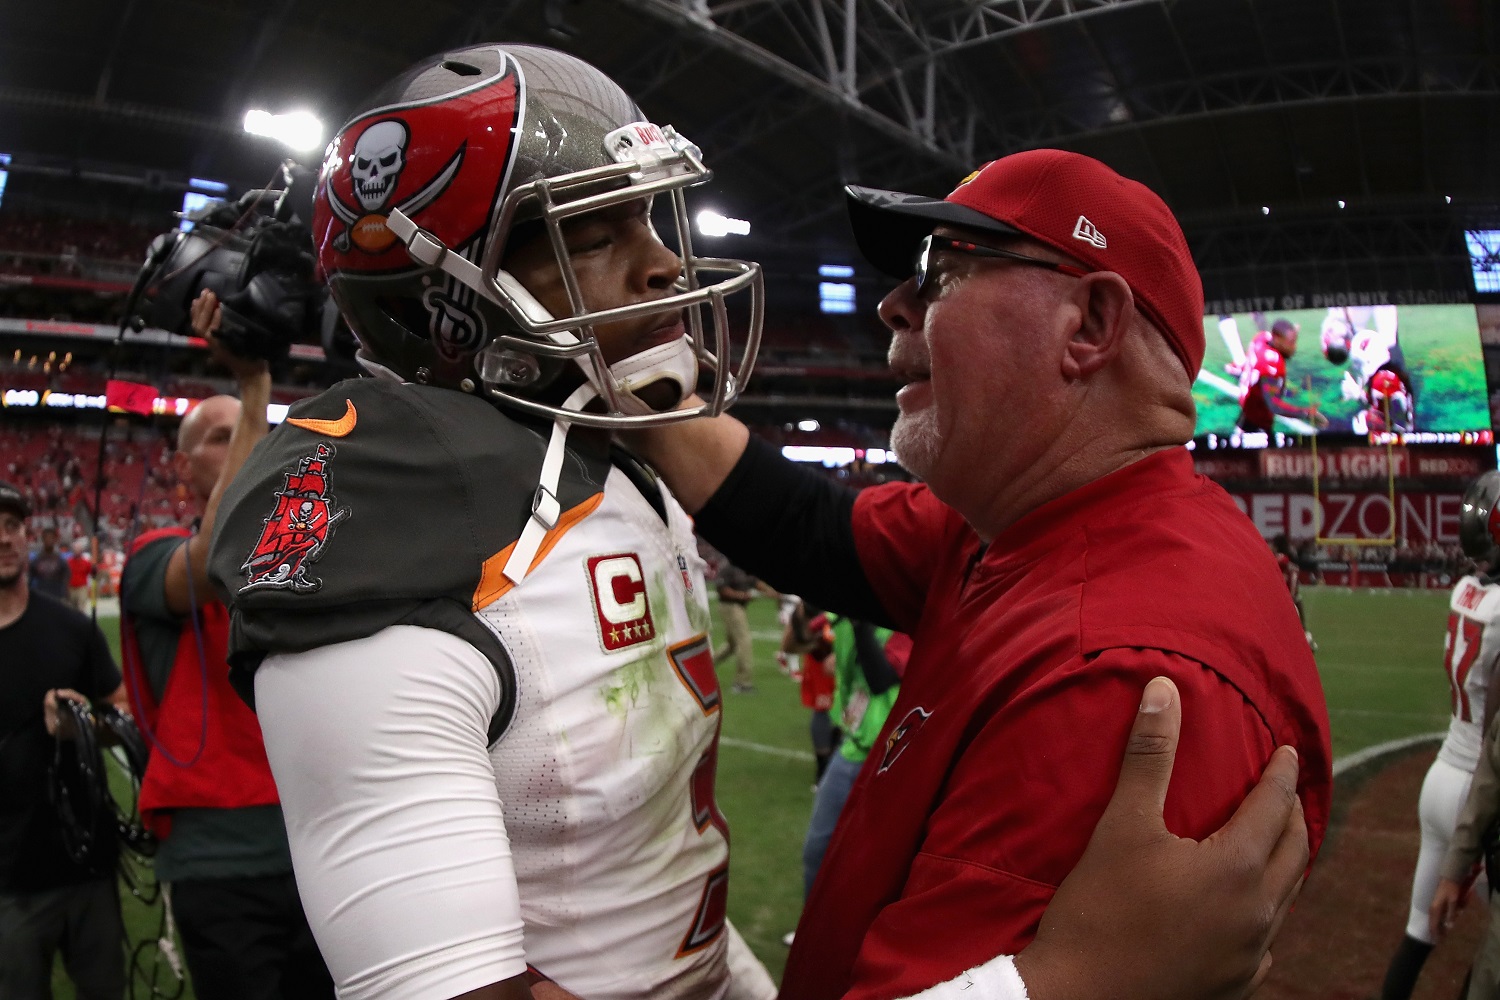 Bruce Arians Seemed To Throw a Little Jab at Jameis Winston Following the Buccaneers’ Comeback Win Over the Chargers